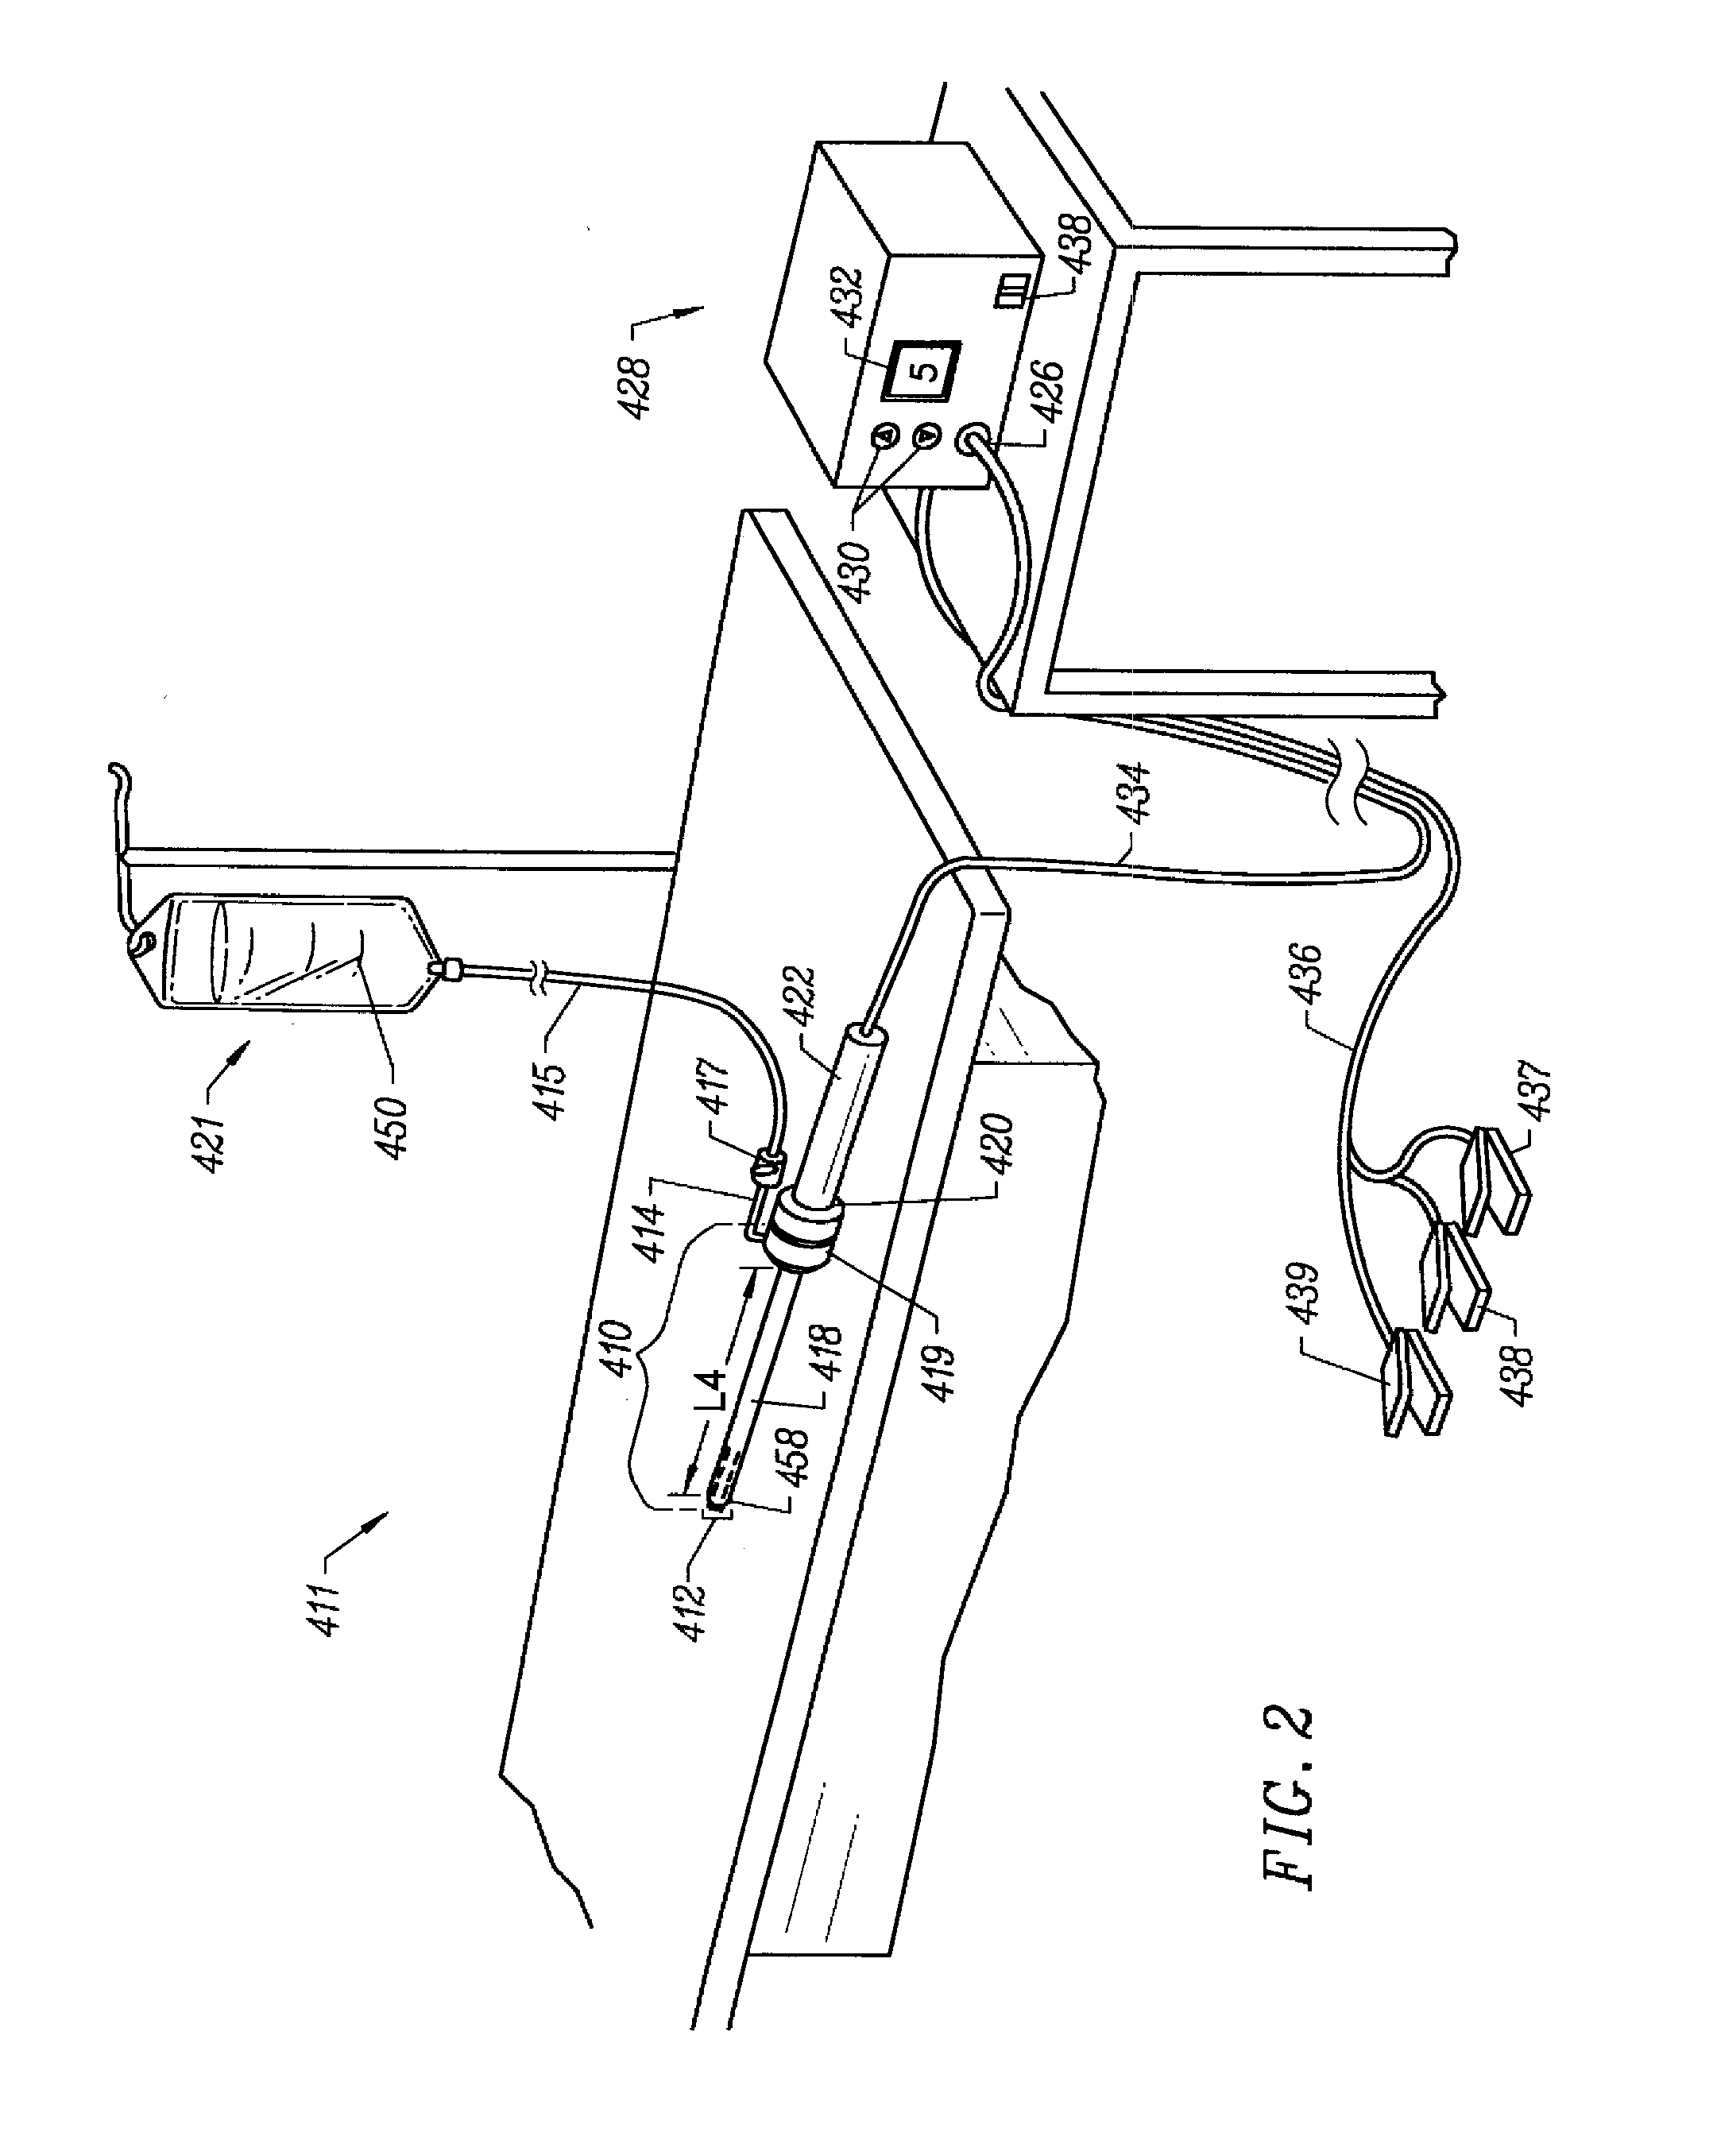 Electrosurgical apparatus and methods for laparoscopy